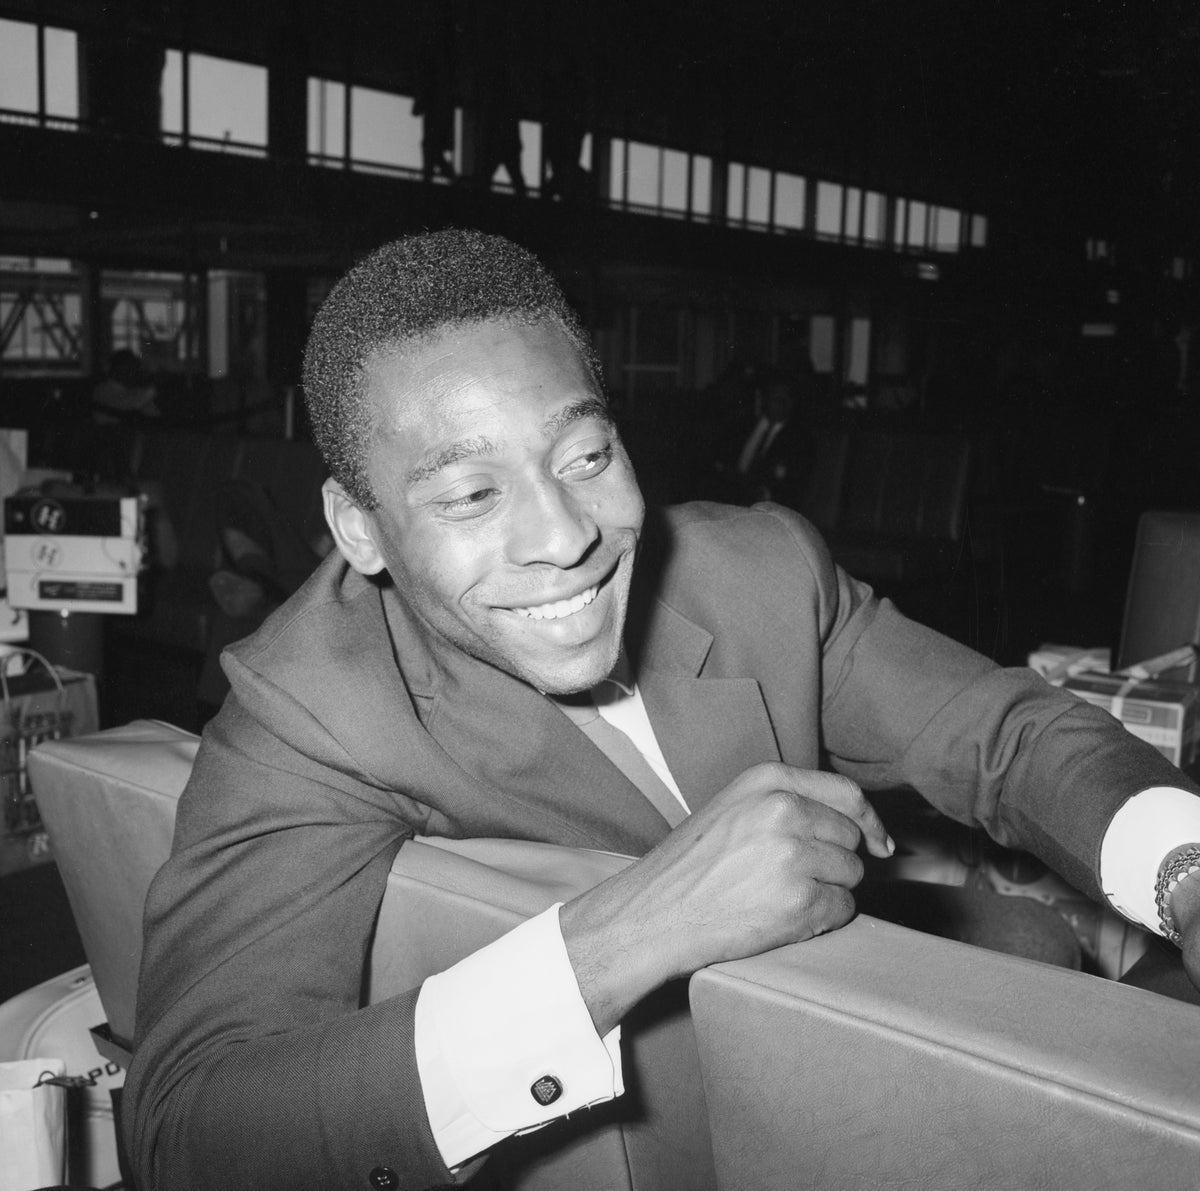 Pele in pictures: Images from the life and career of Brazil’s football legend